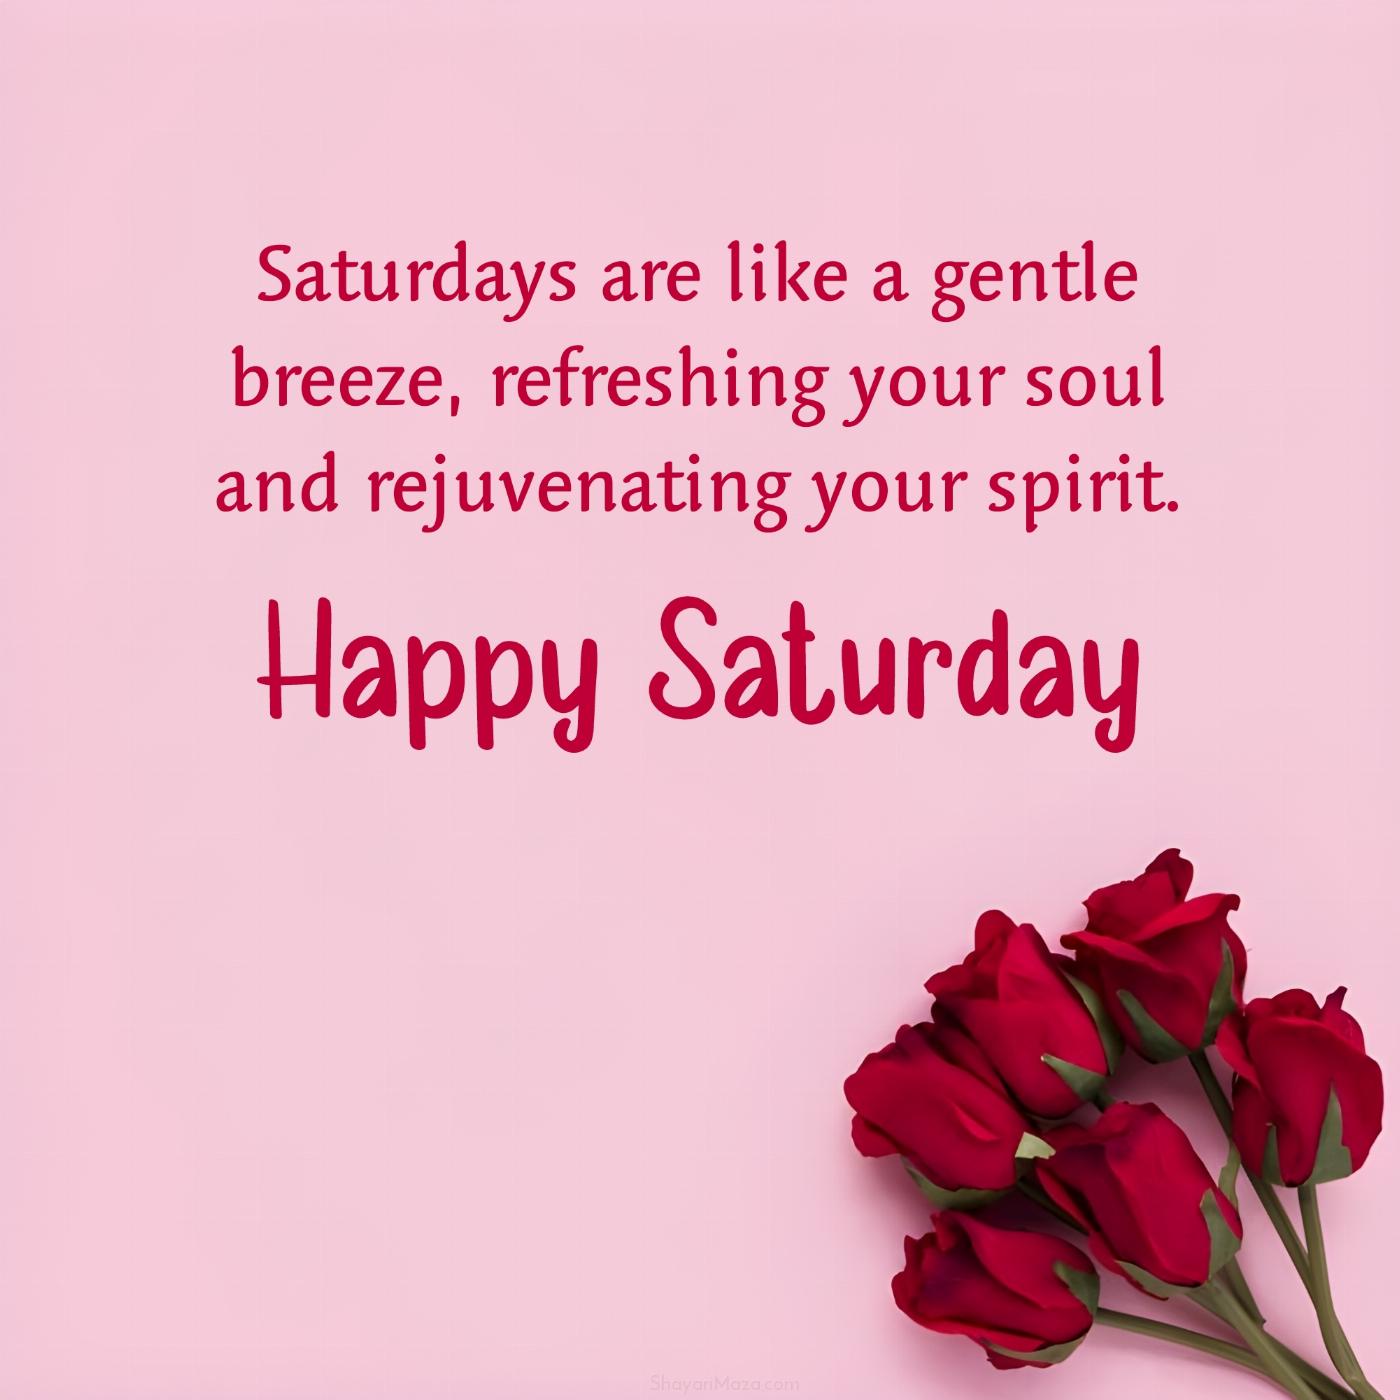 Saturdays are like a gentle breeze refreshing your soul